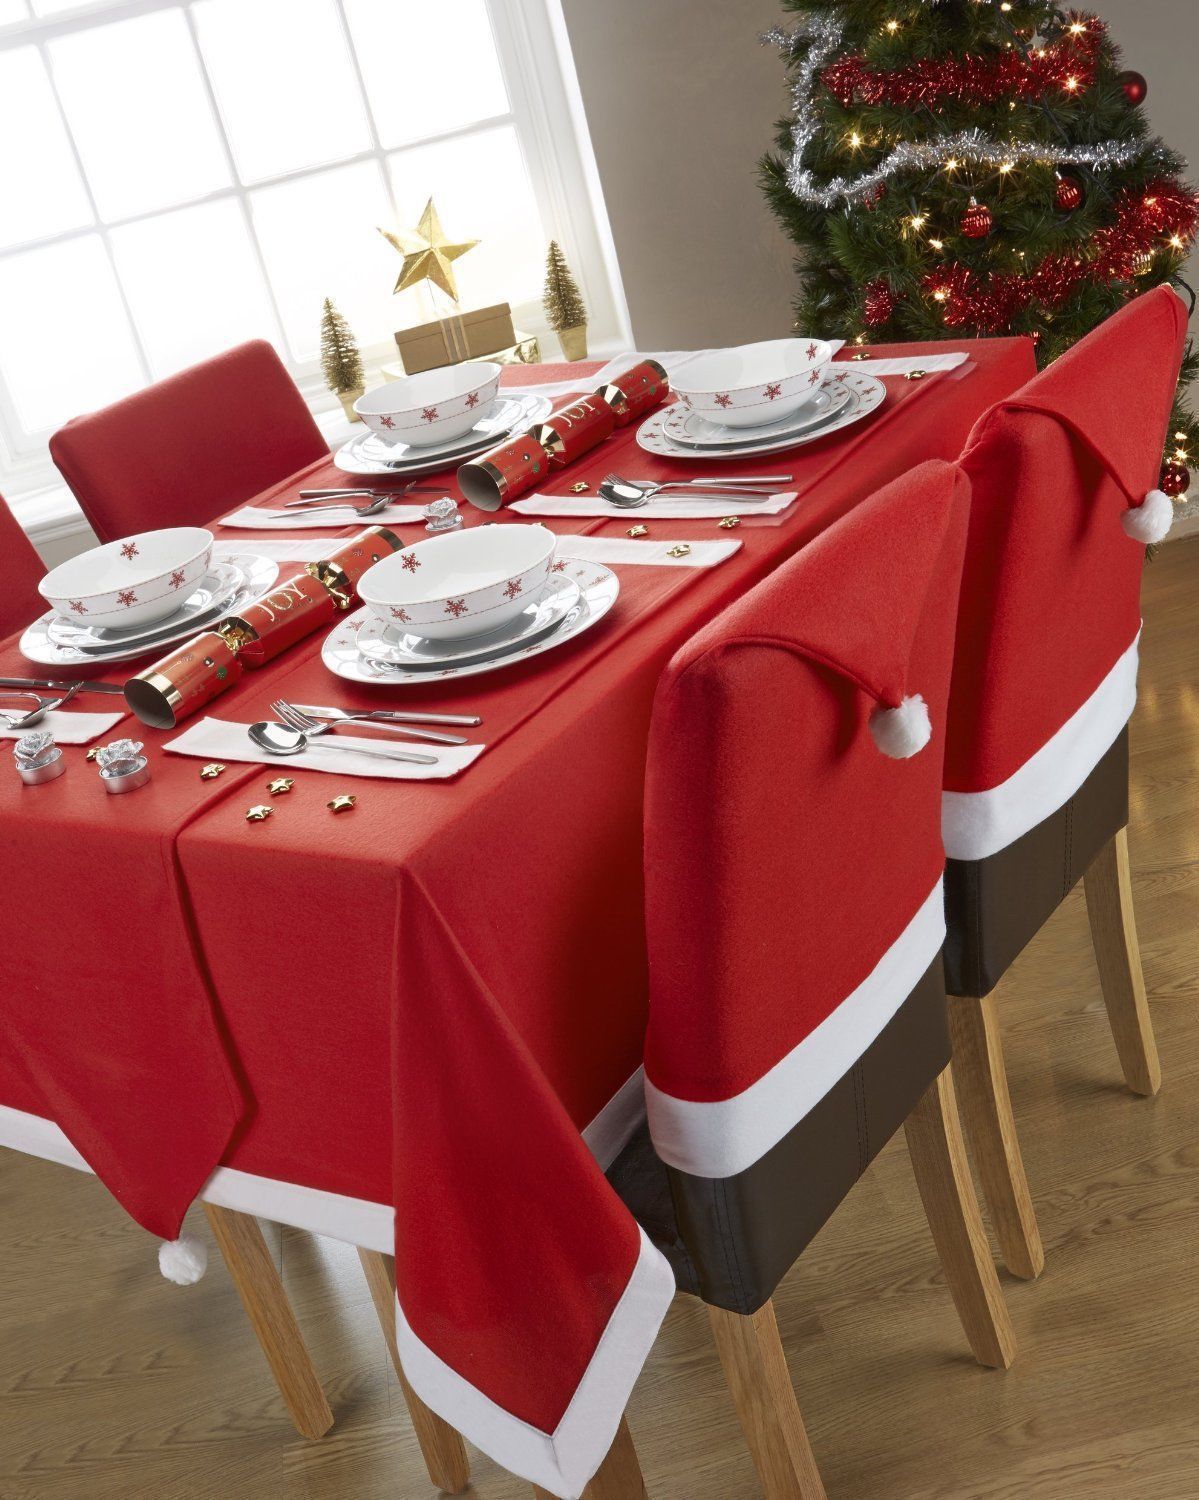 Christmas Chair Covers Tablecloth Runner Decoration Xmas Dinner Party Santa Gift, 8x Chair Covers - SILBERSHELL